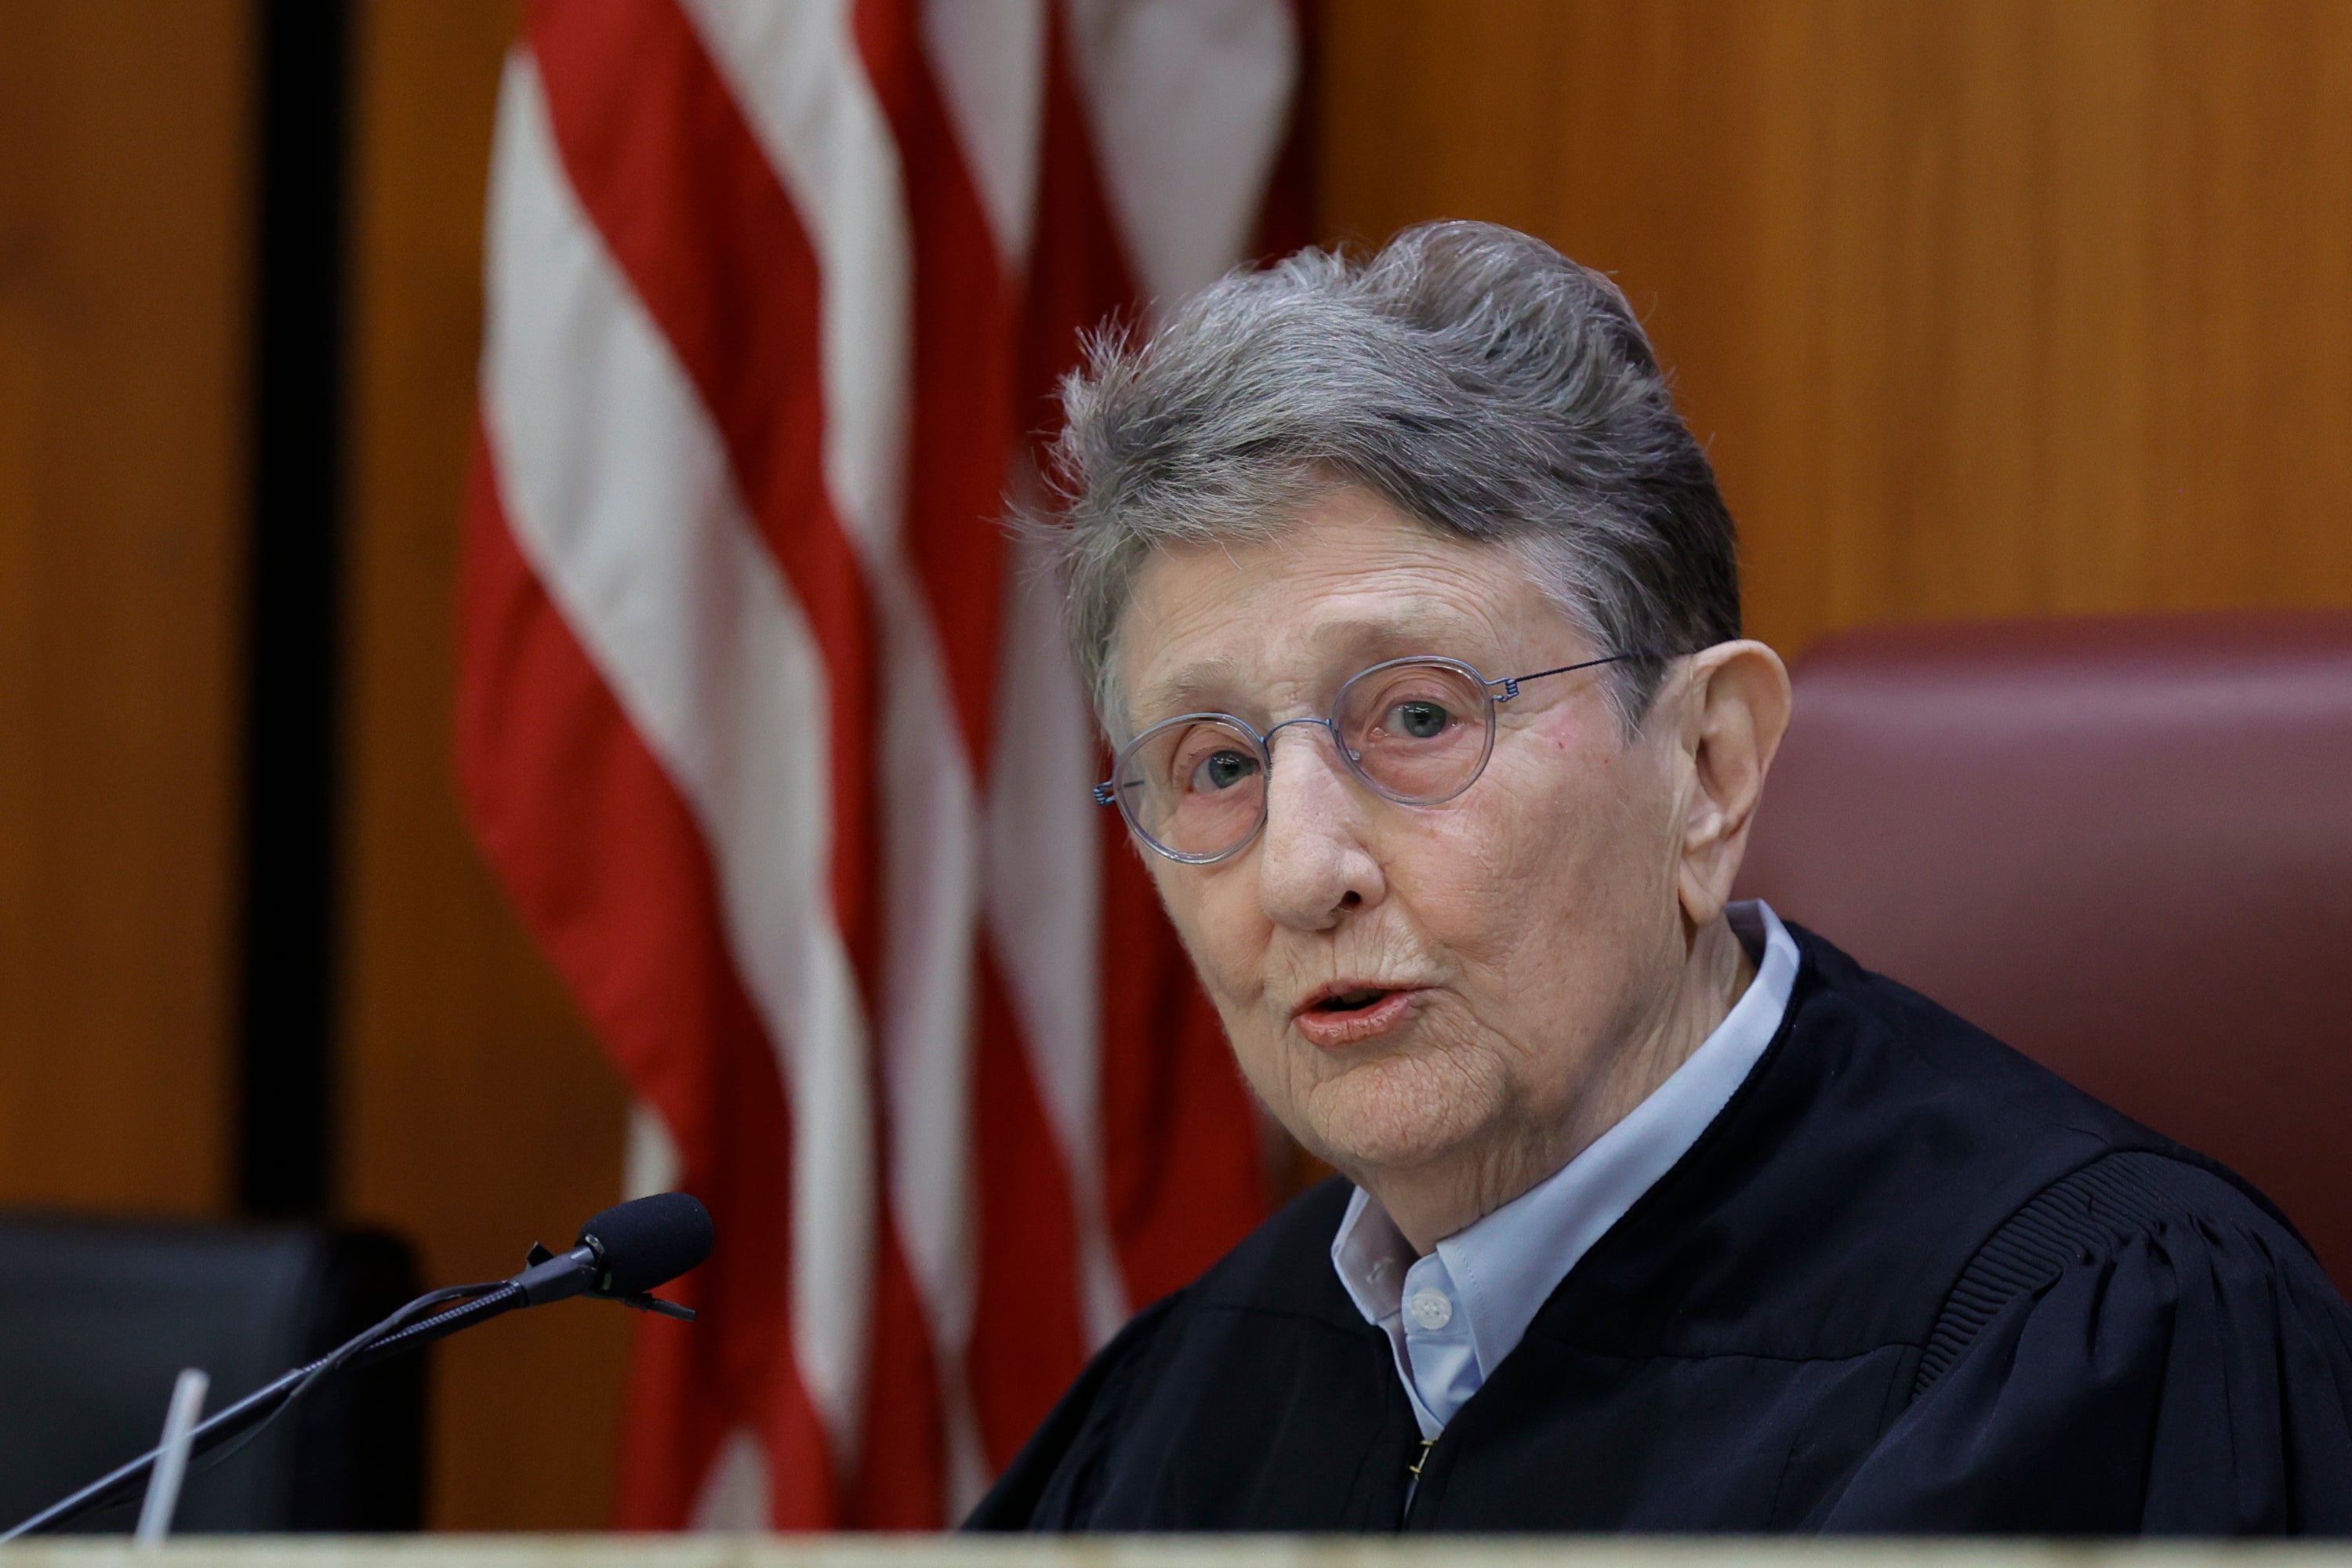 Former South Carolina Supreme Court Justice Jean Toal on Tuesday limited witness questioning and set a high burden of proof surrounding accusations that the court clerk tampered with the jury